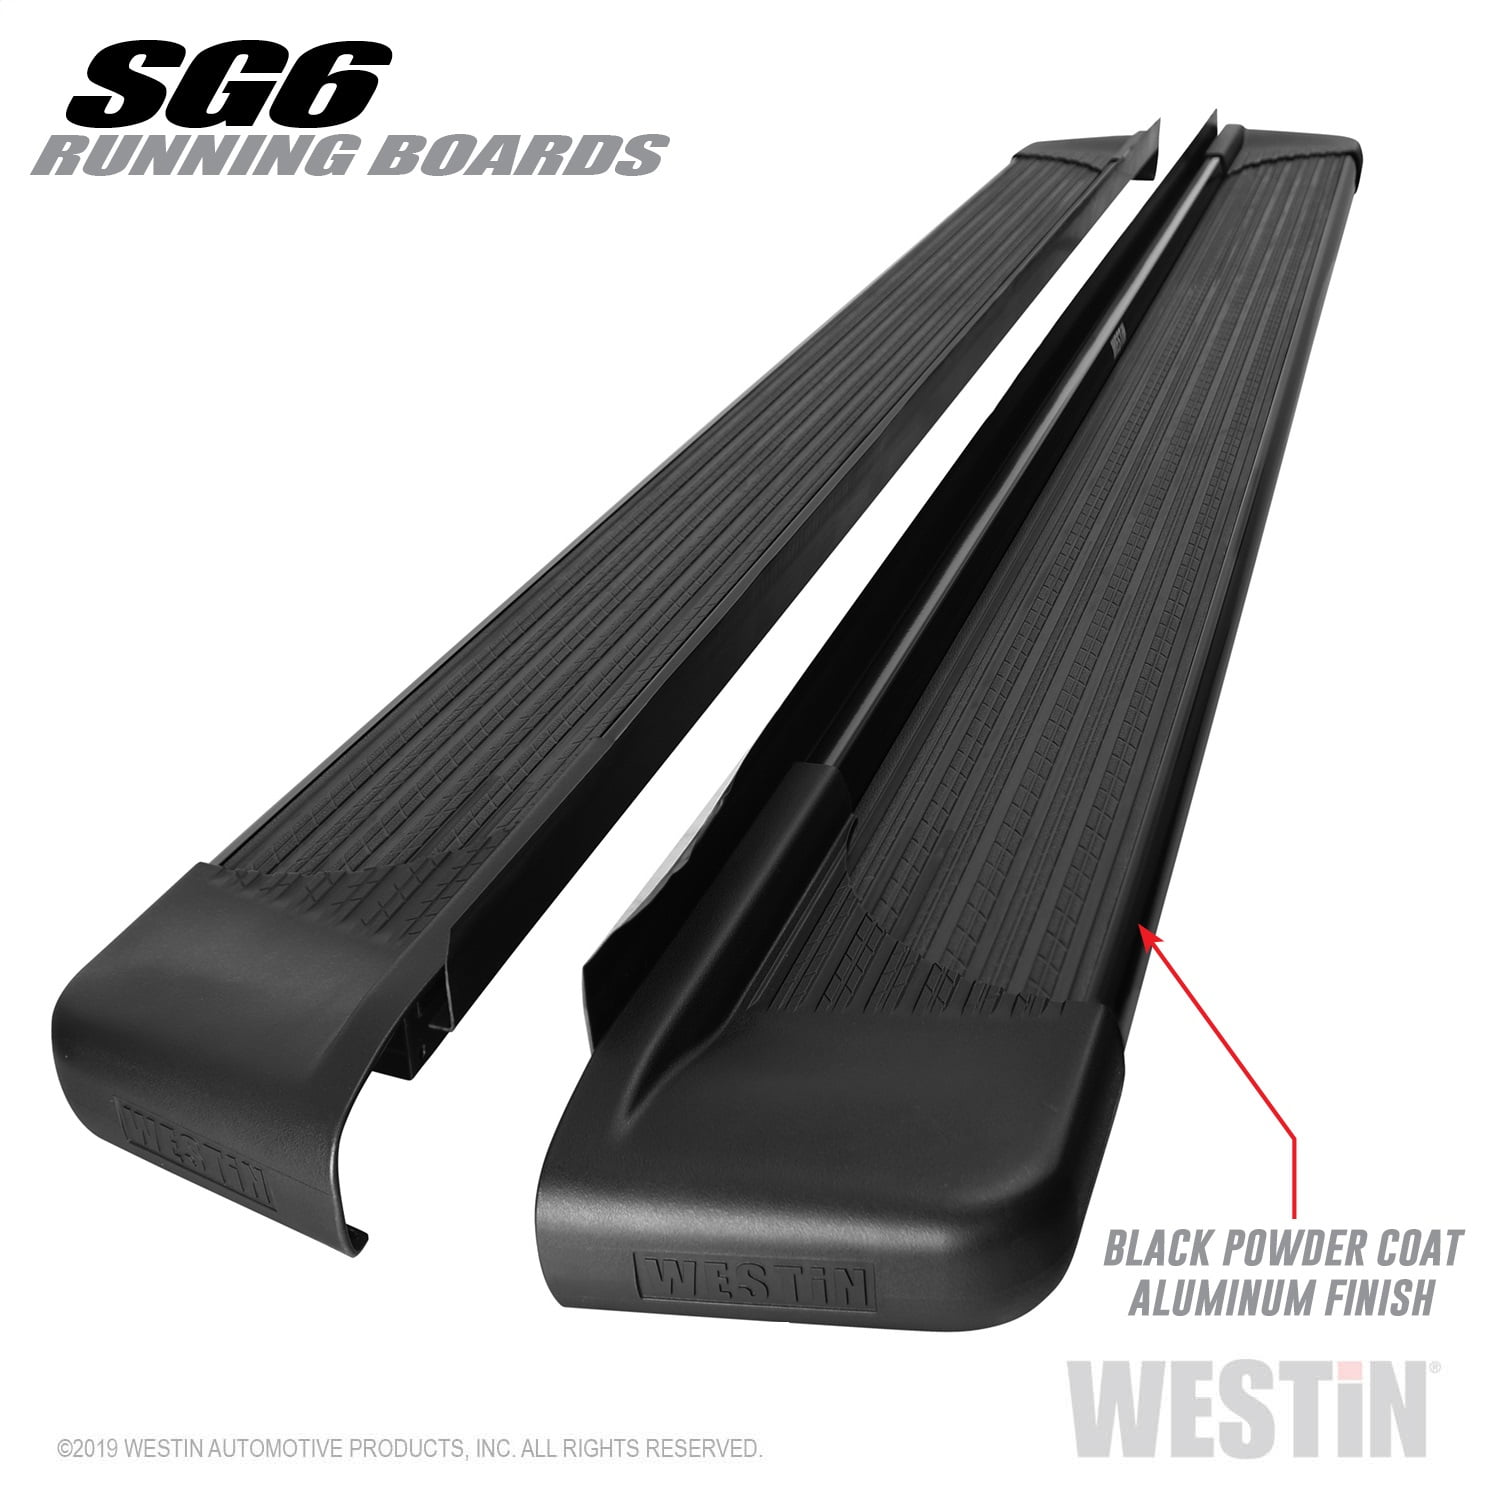 85.5 INCHES BLACK SG6 RUNNING BOARDS (BRKT SOLD SEP)